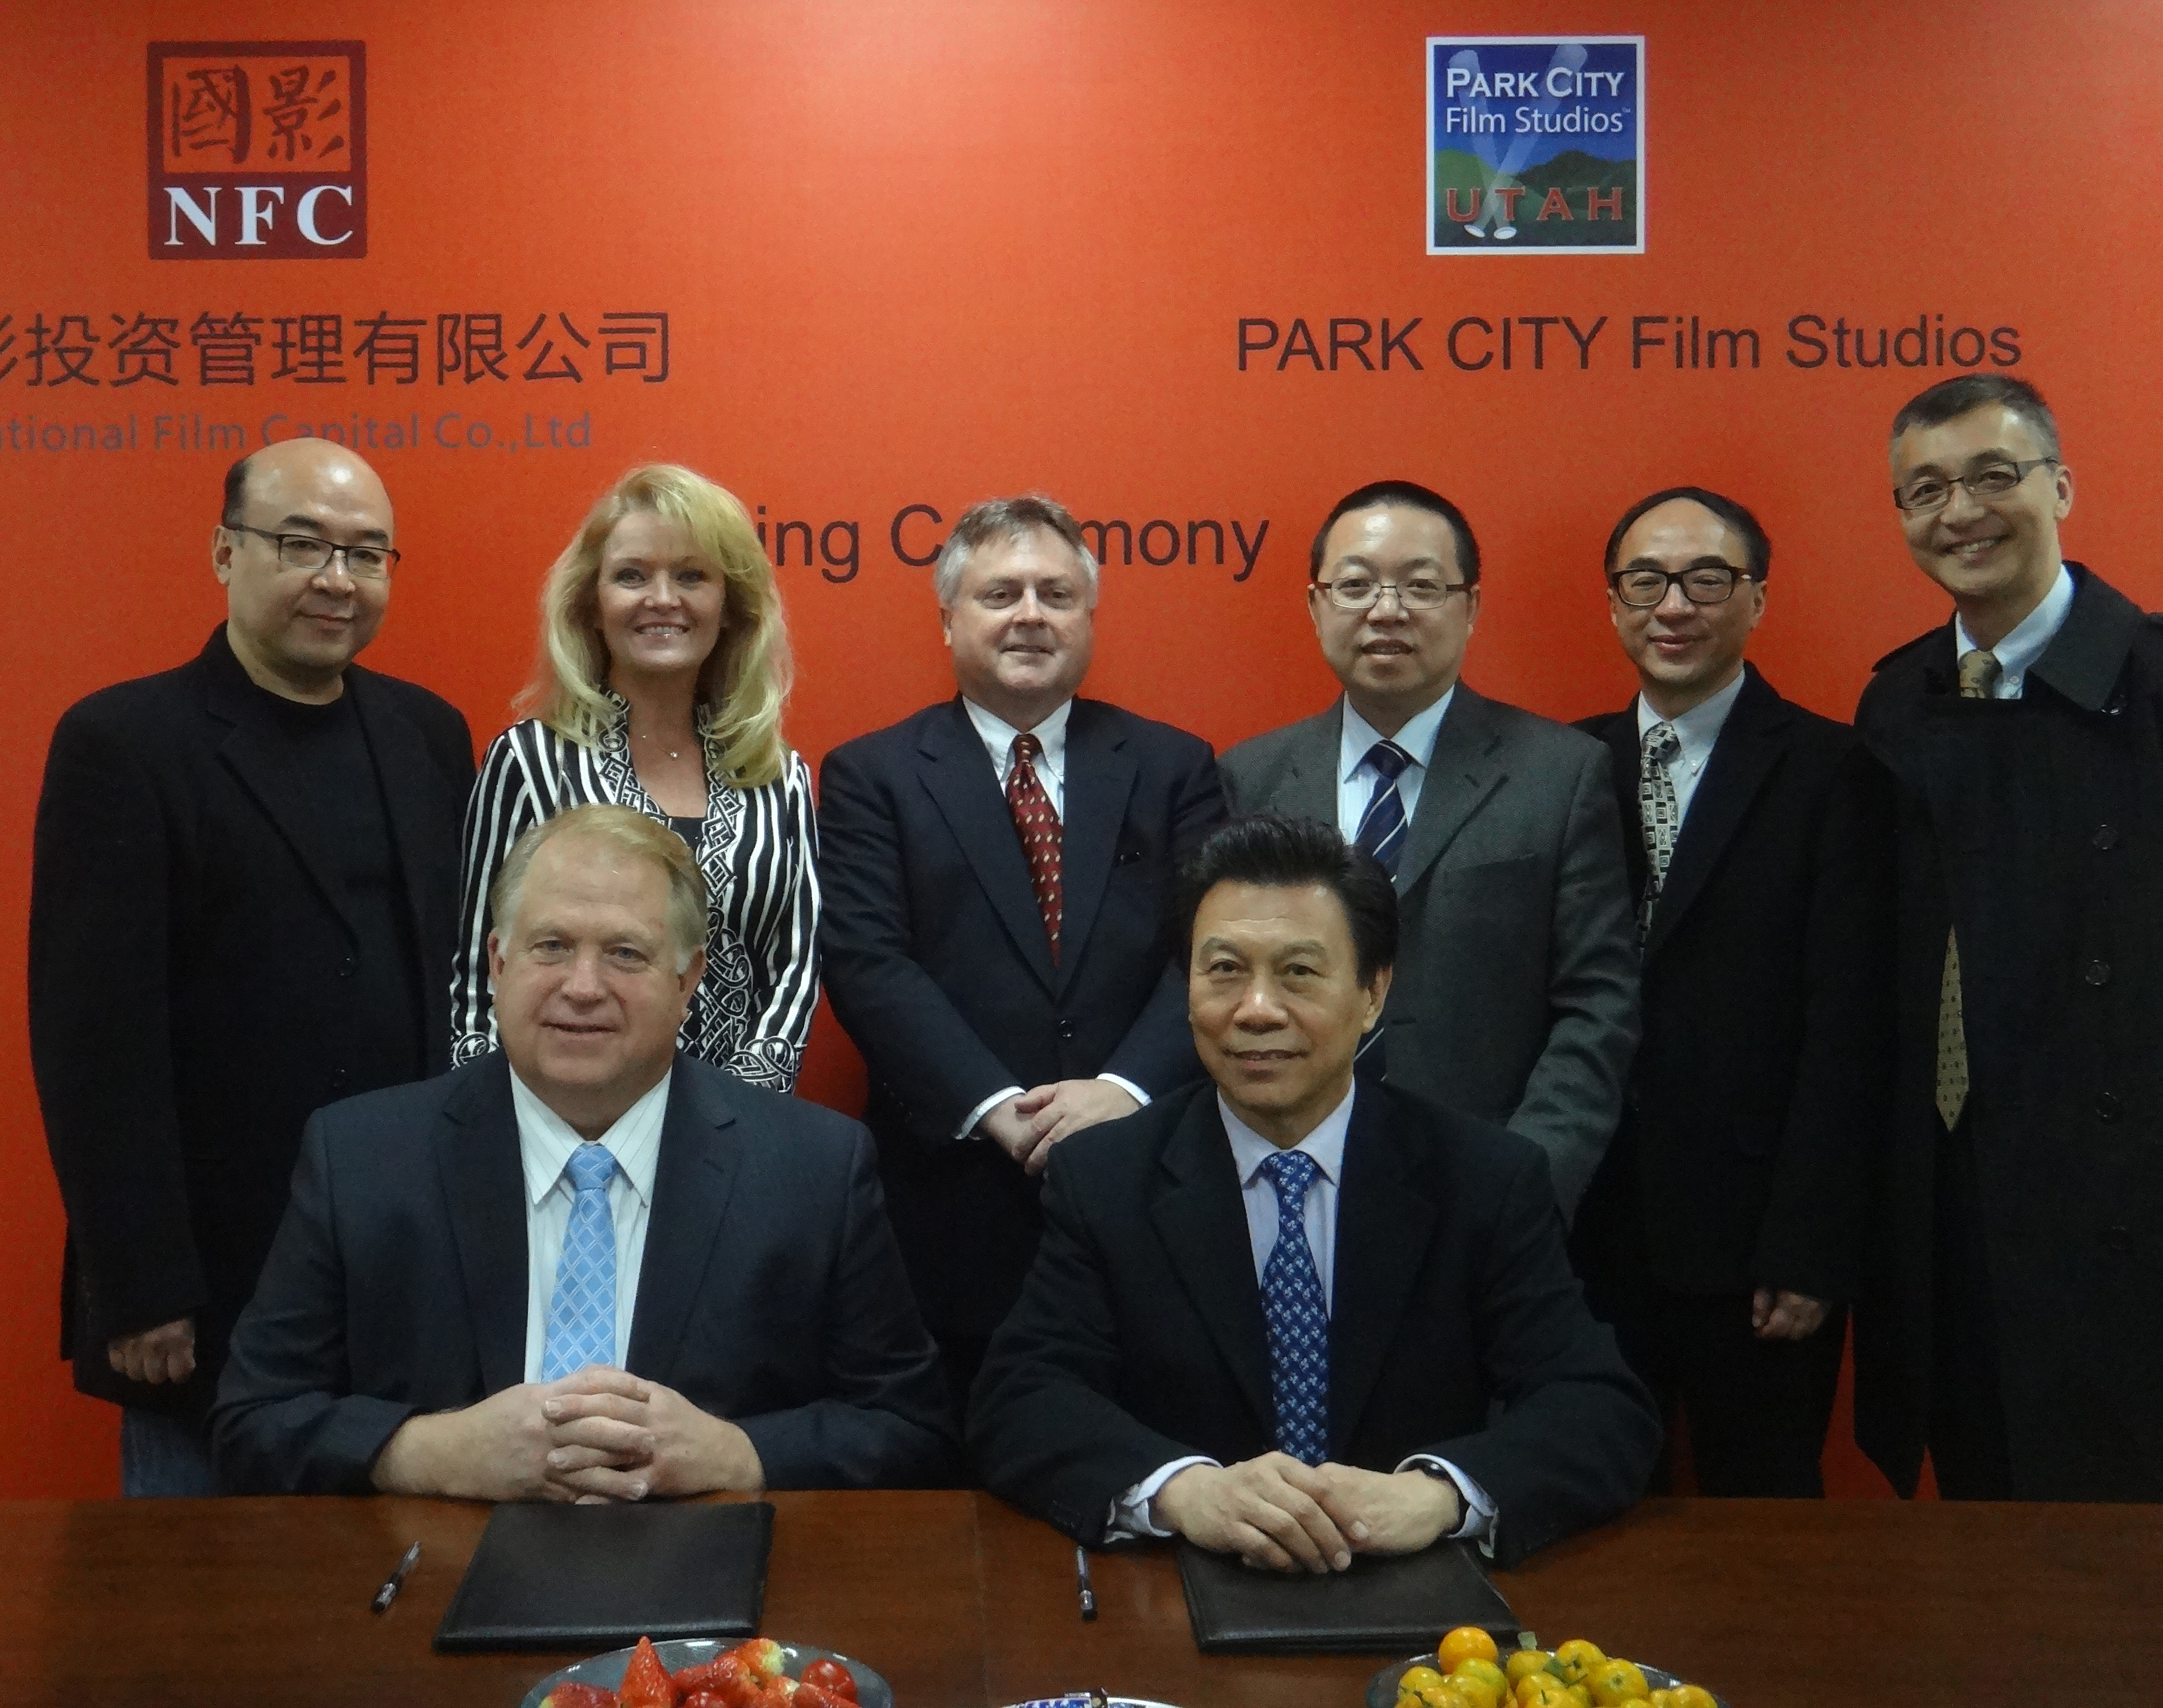 Beijing. Signing ceremony for memorandum of understanding arranged by Adventure Entertainment Cos. LLC, defining framework for cooperation by and between National Film Capital China Co. Ltd., and Park City Film Studios.